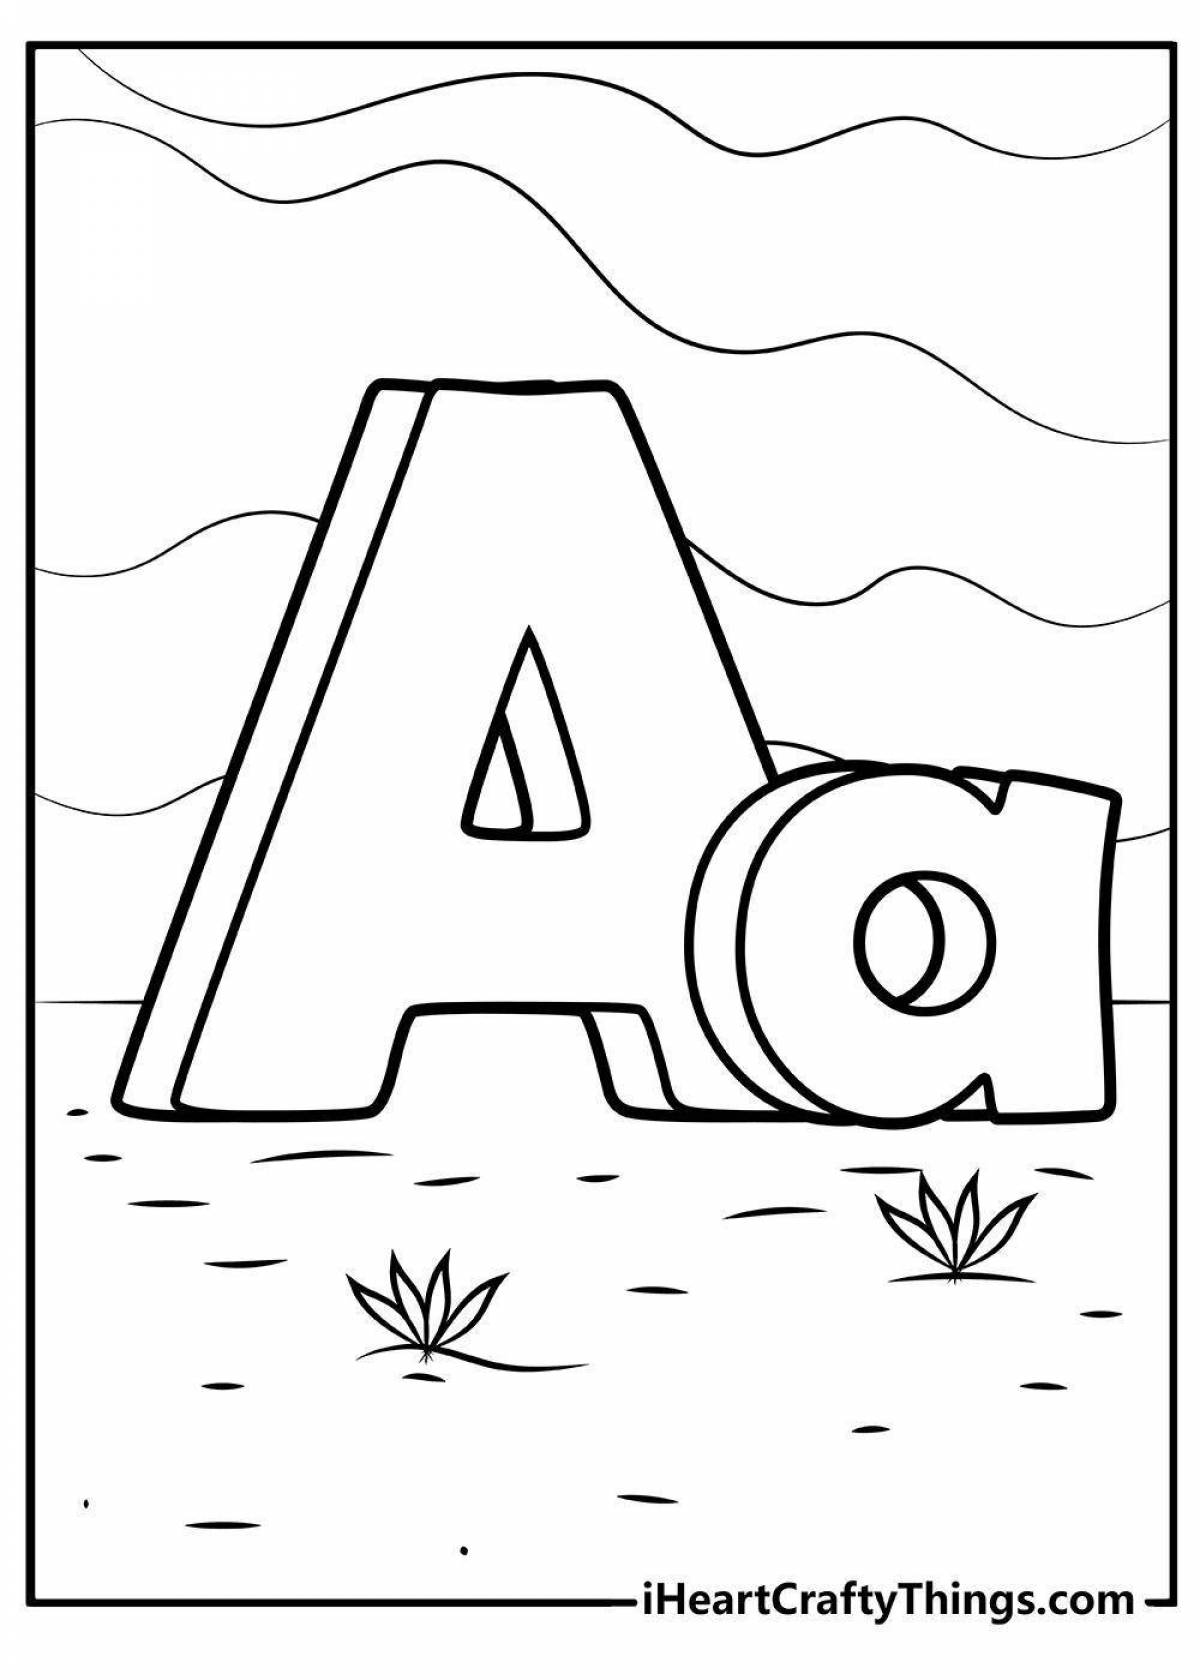 Colorful Laura Alphabet Coloring Page for Toddlers